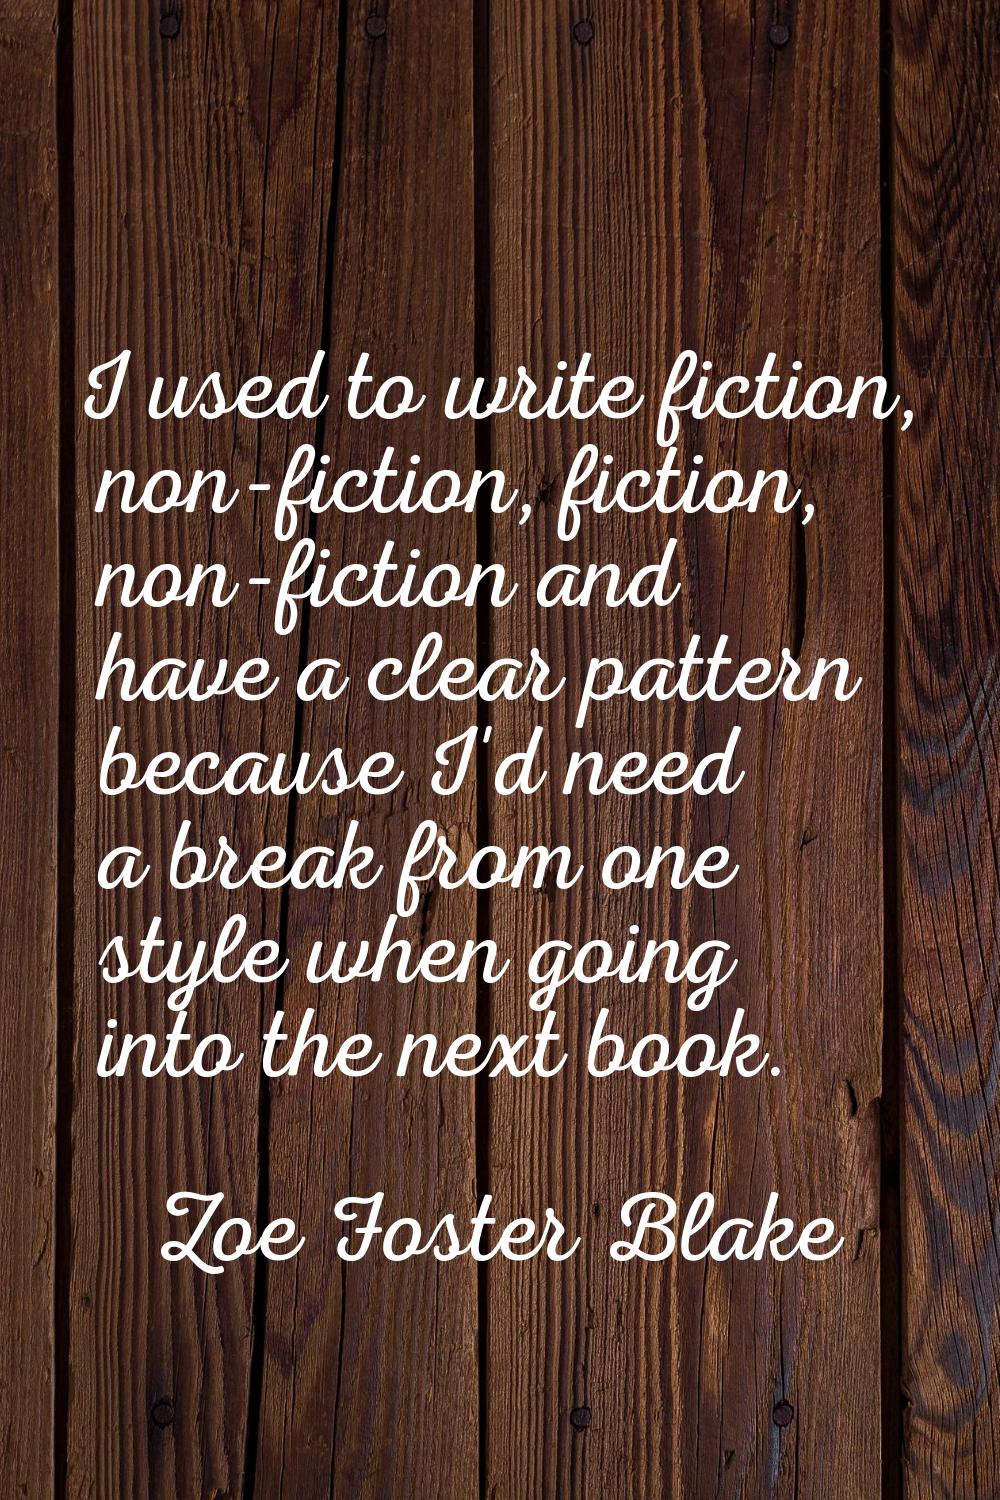 I used to write fiction, non-fiction, fiction, non-fiction and have a clear pattern because I'd nee